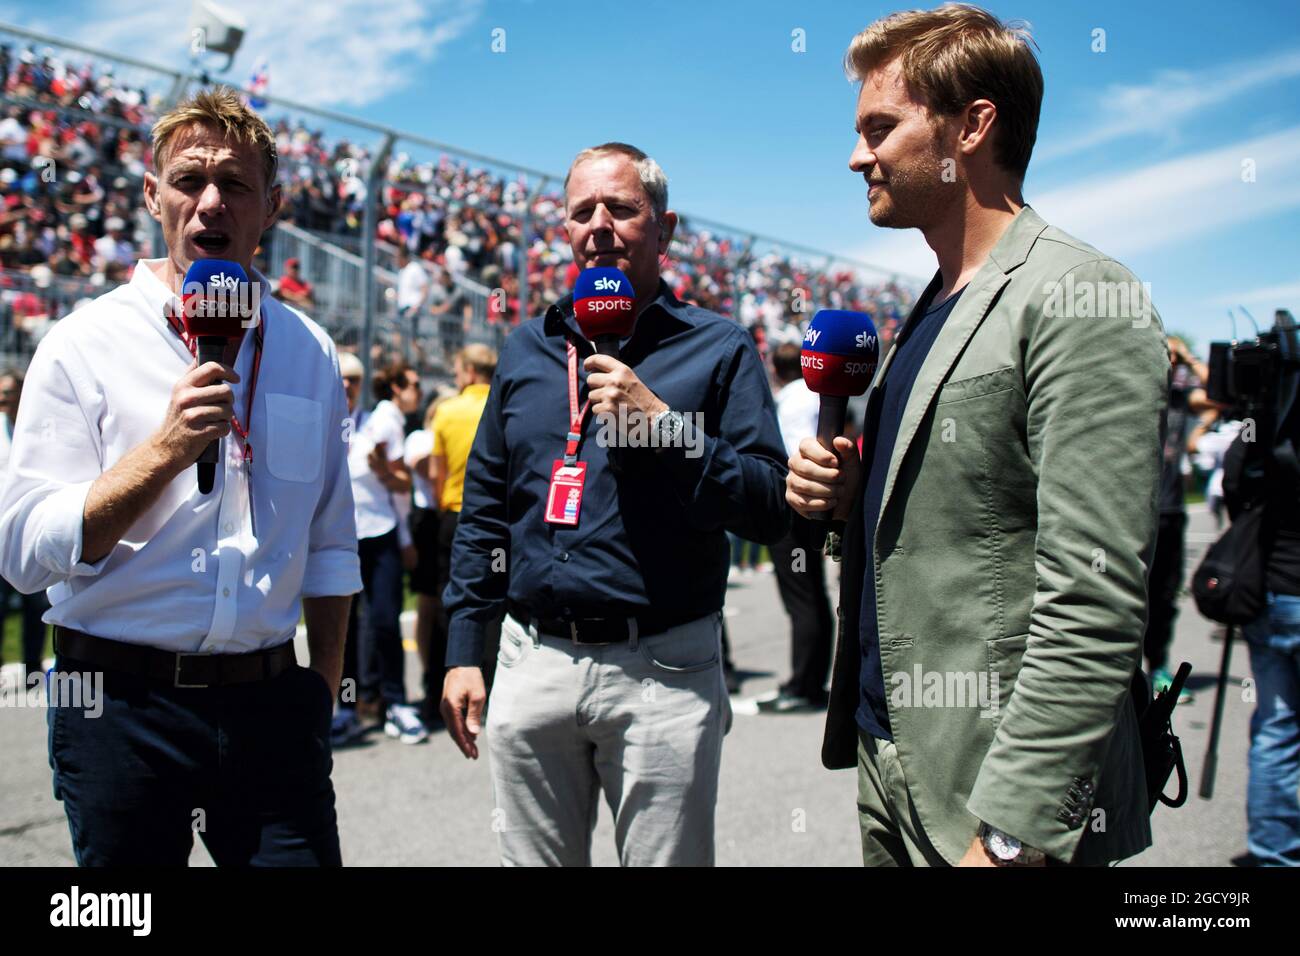 L to R) Simon Lazenby (GBR) Sky Sports F1 TV Presenter with Martin Brundle (GBR) Sky Sports Commentator and Nico Rosberg (GER) on the grid